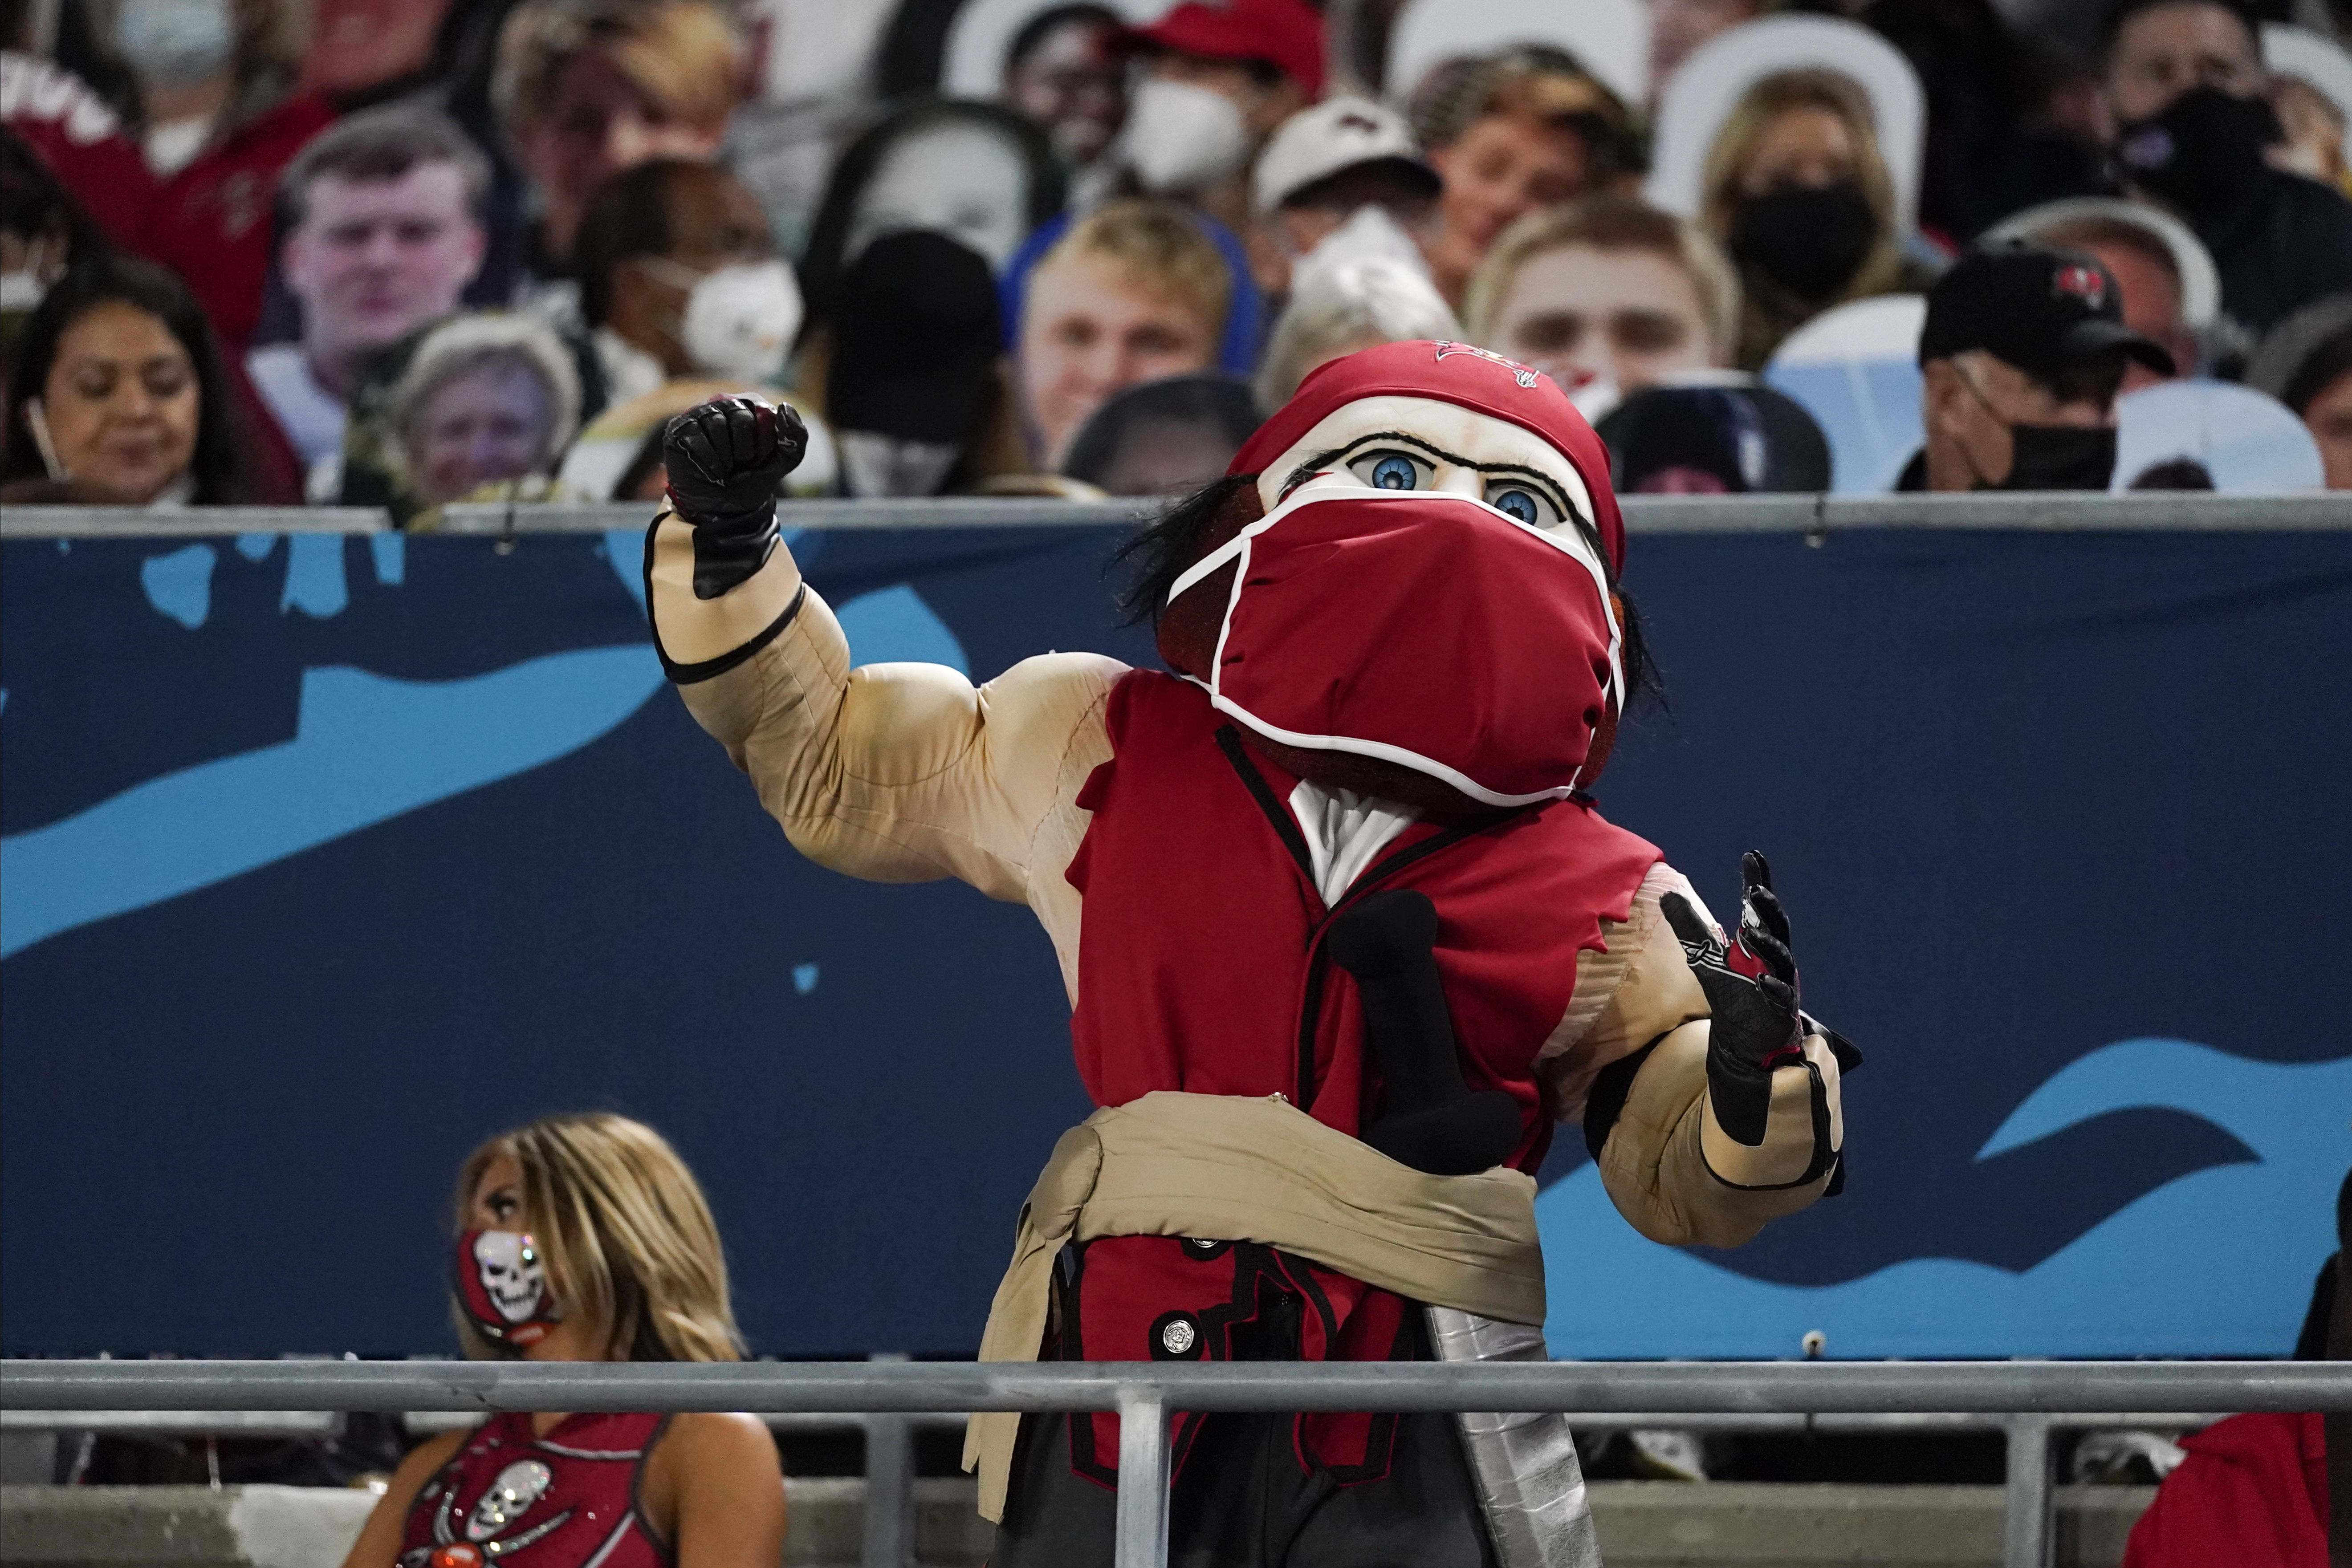 What is the Tampa Bay Buccaneers mascot? Meet Captain Fear